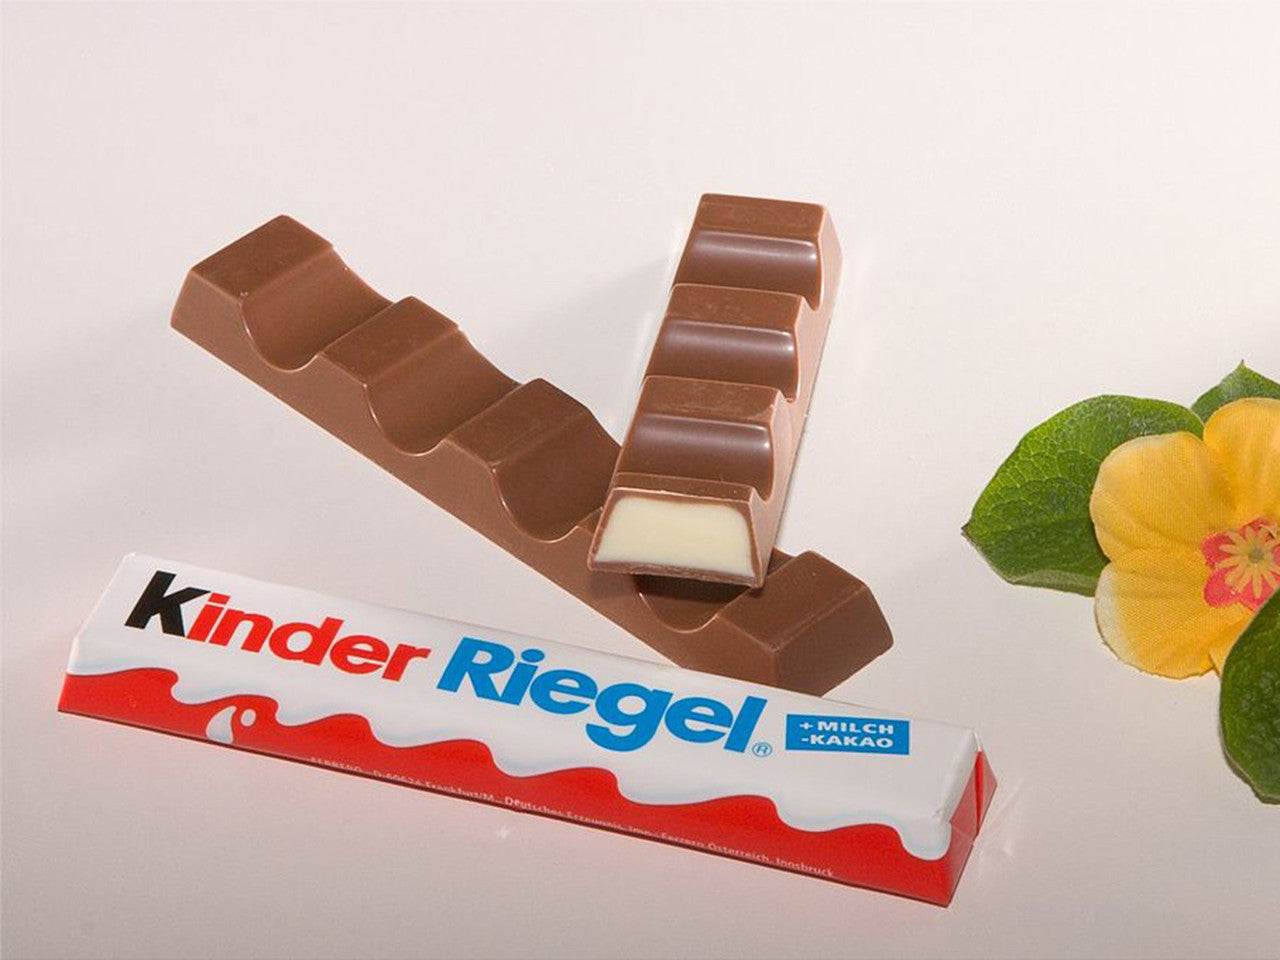 Kinder Milk Chocolate Single Bars, 6ct, 126g/4.4 oz. Box {Imported from  Canada} 